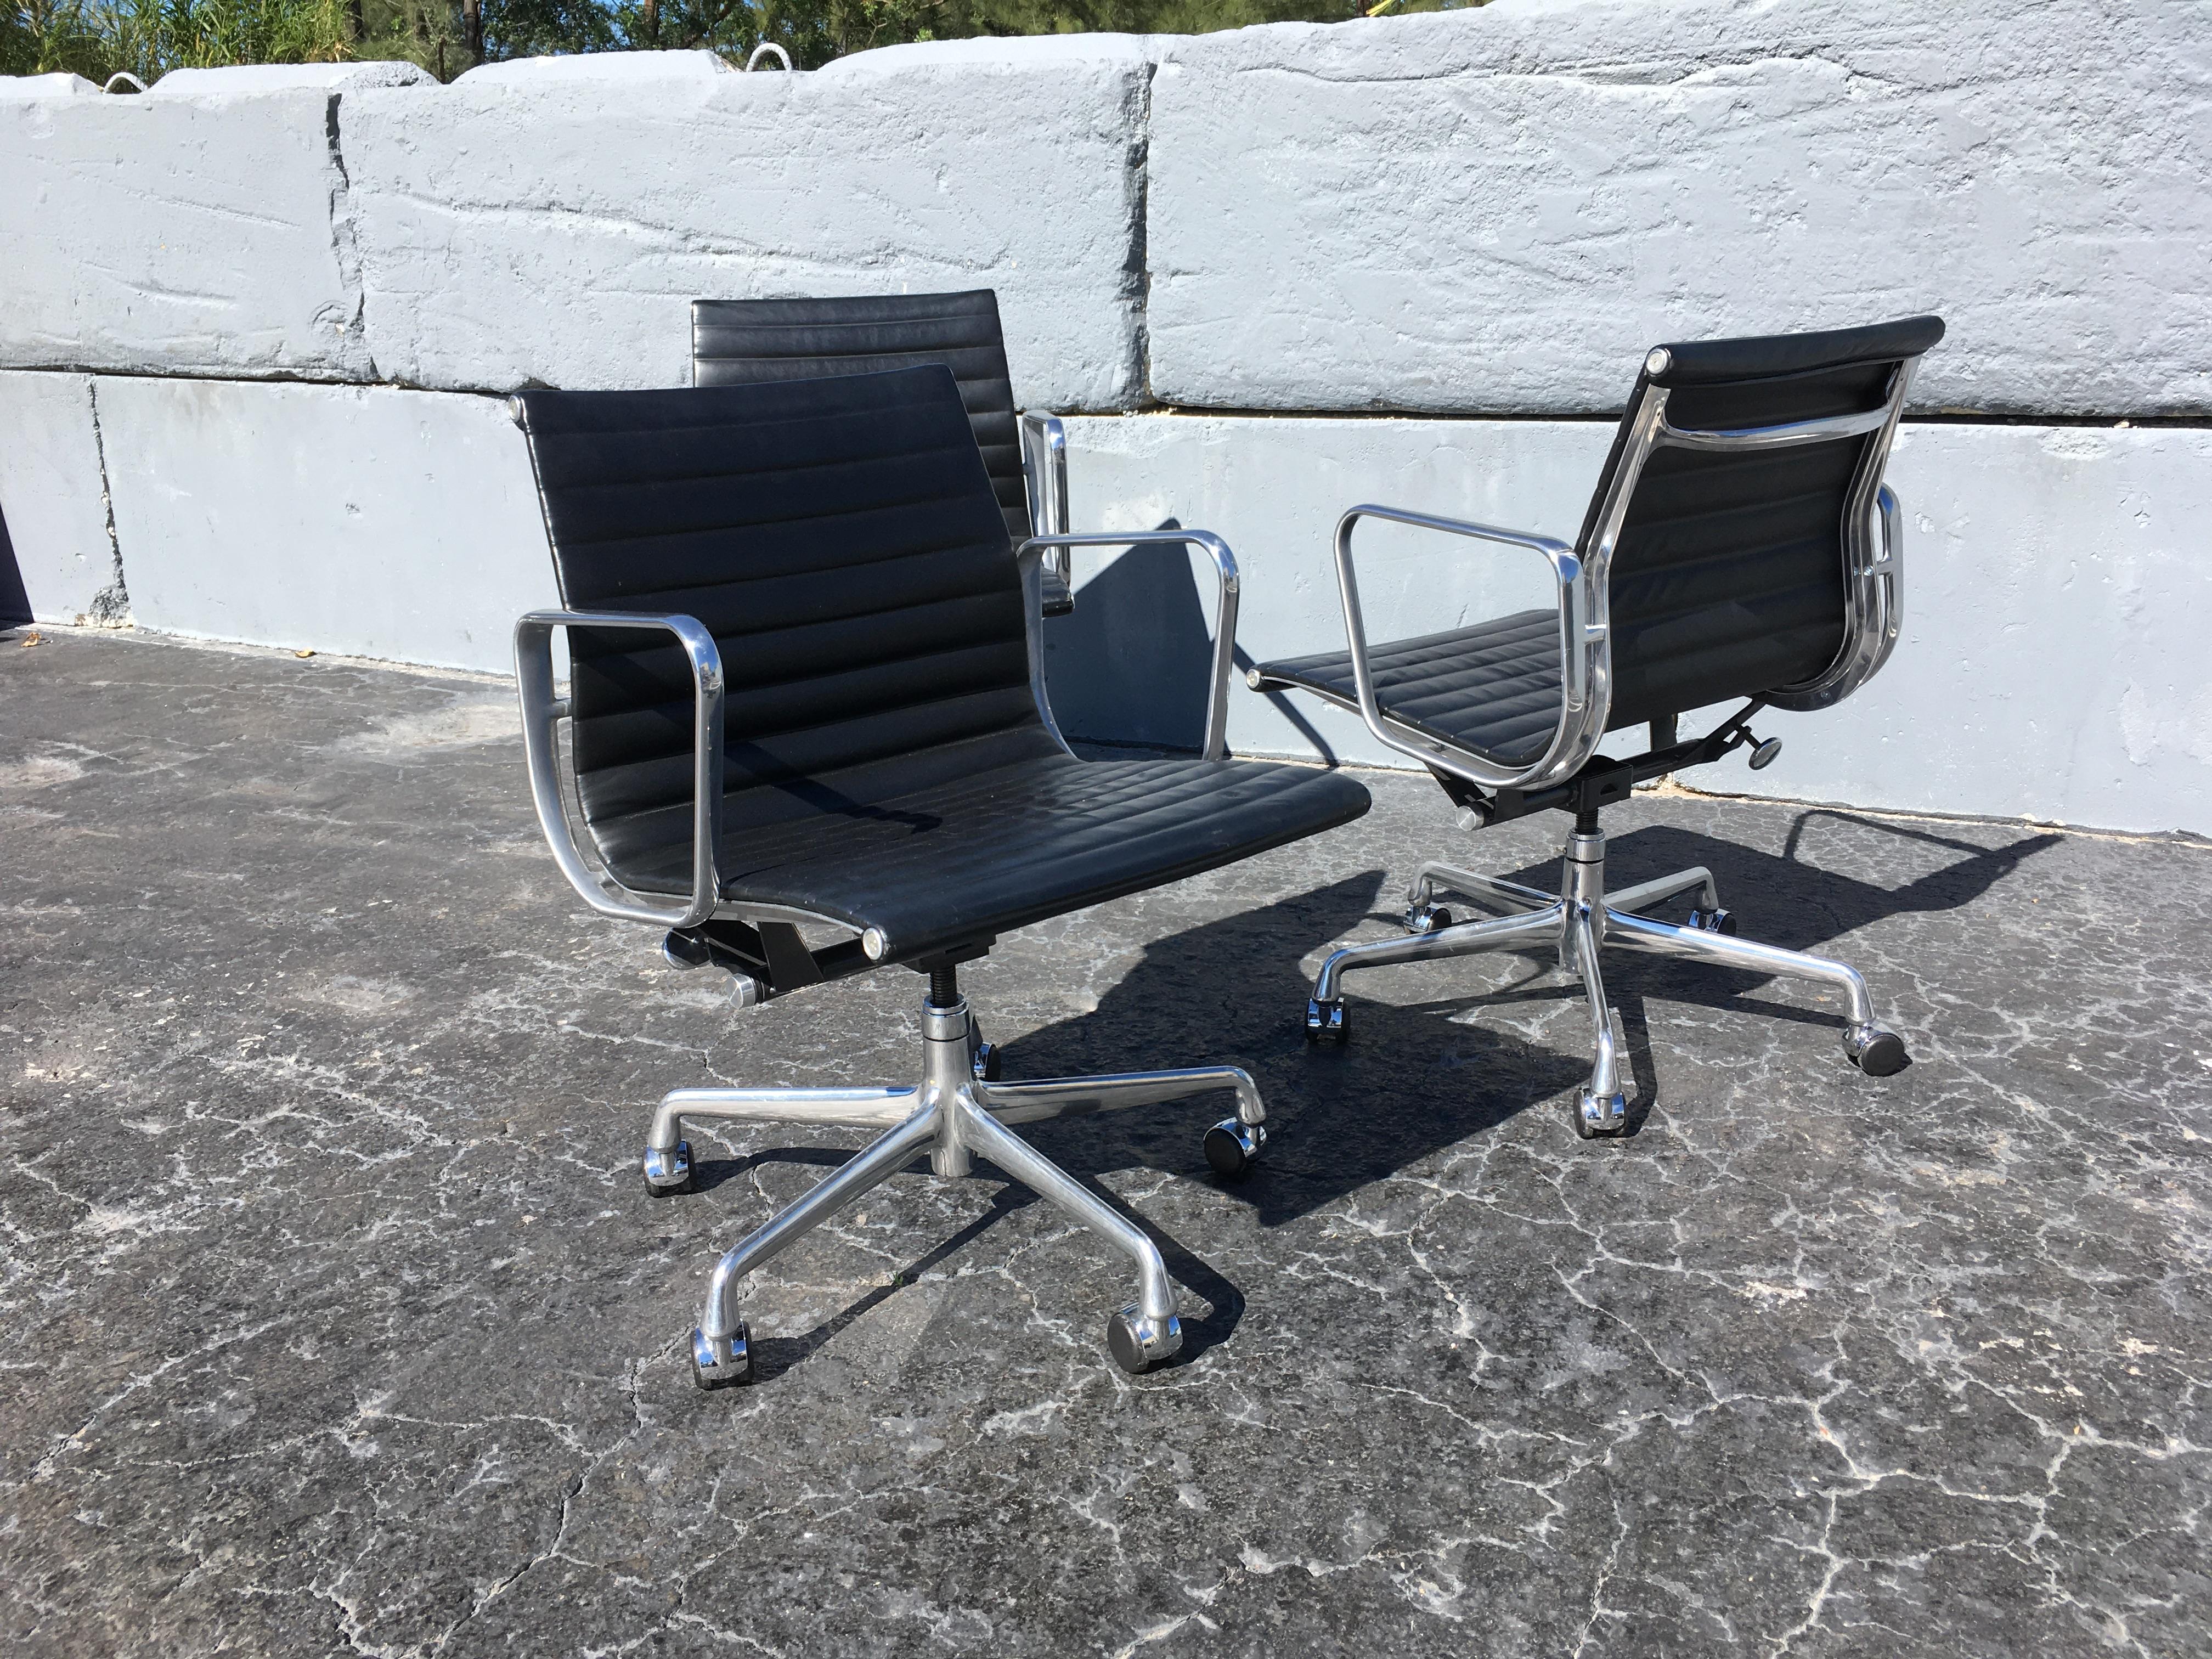 Eames aluminium management chairs in black leather for Herman Miller. Chairs are from 2005 and have some normal wear. These chairs are great for office or home, manual seat-height adjustment from 17